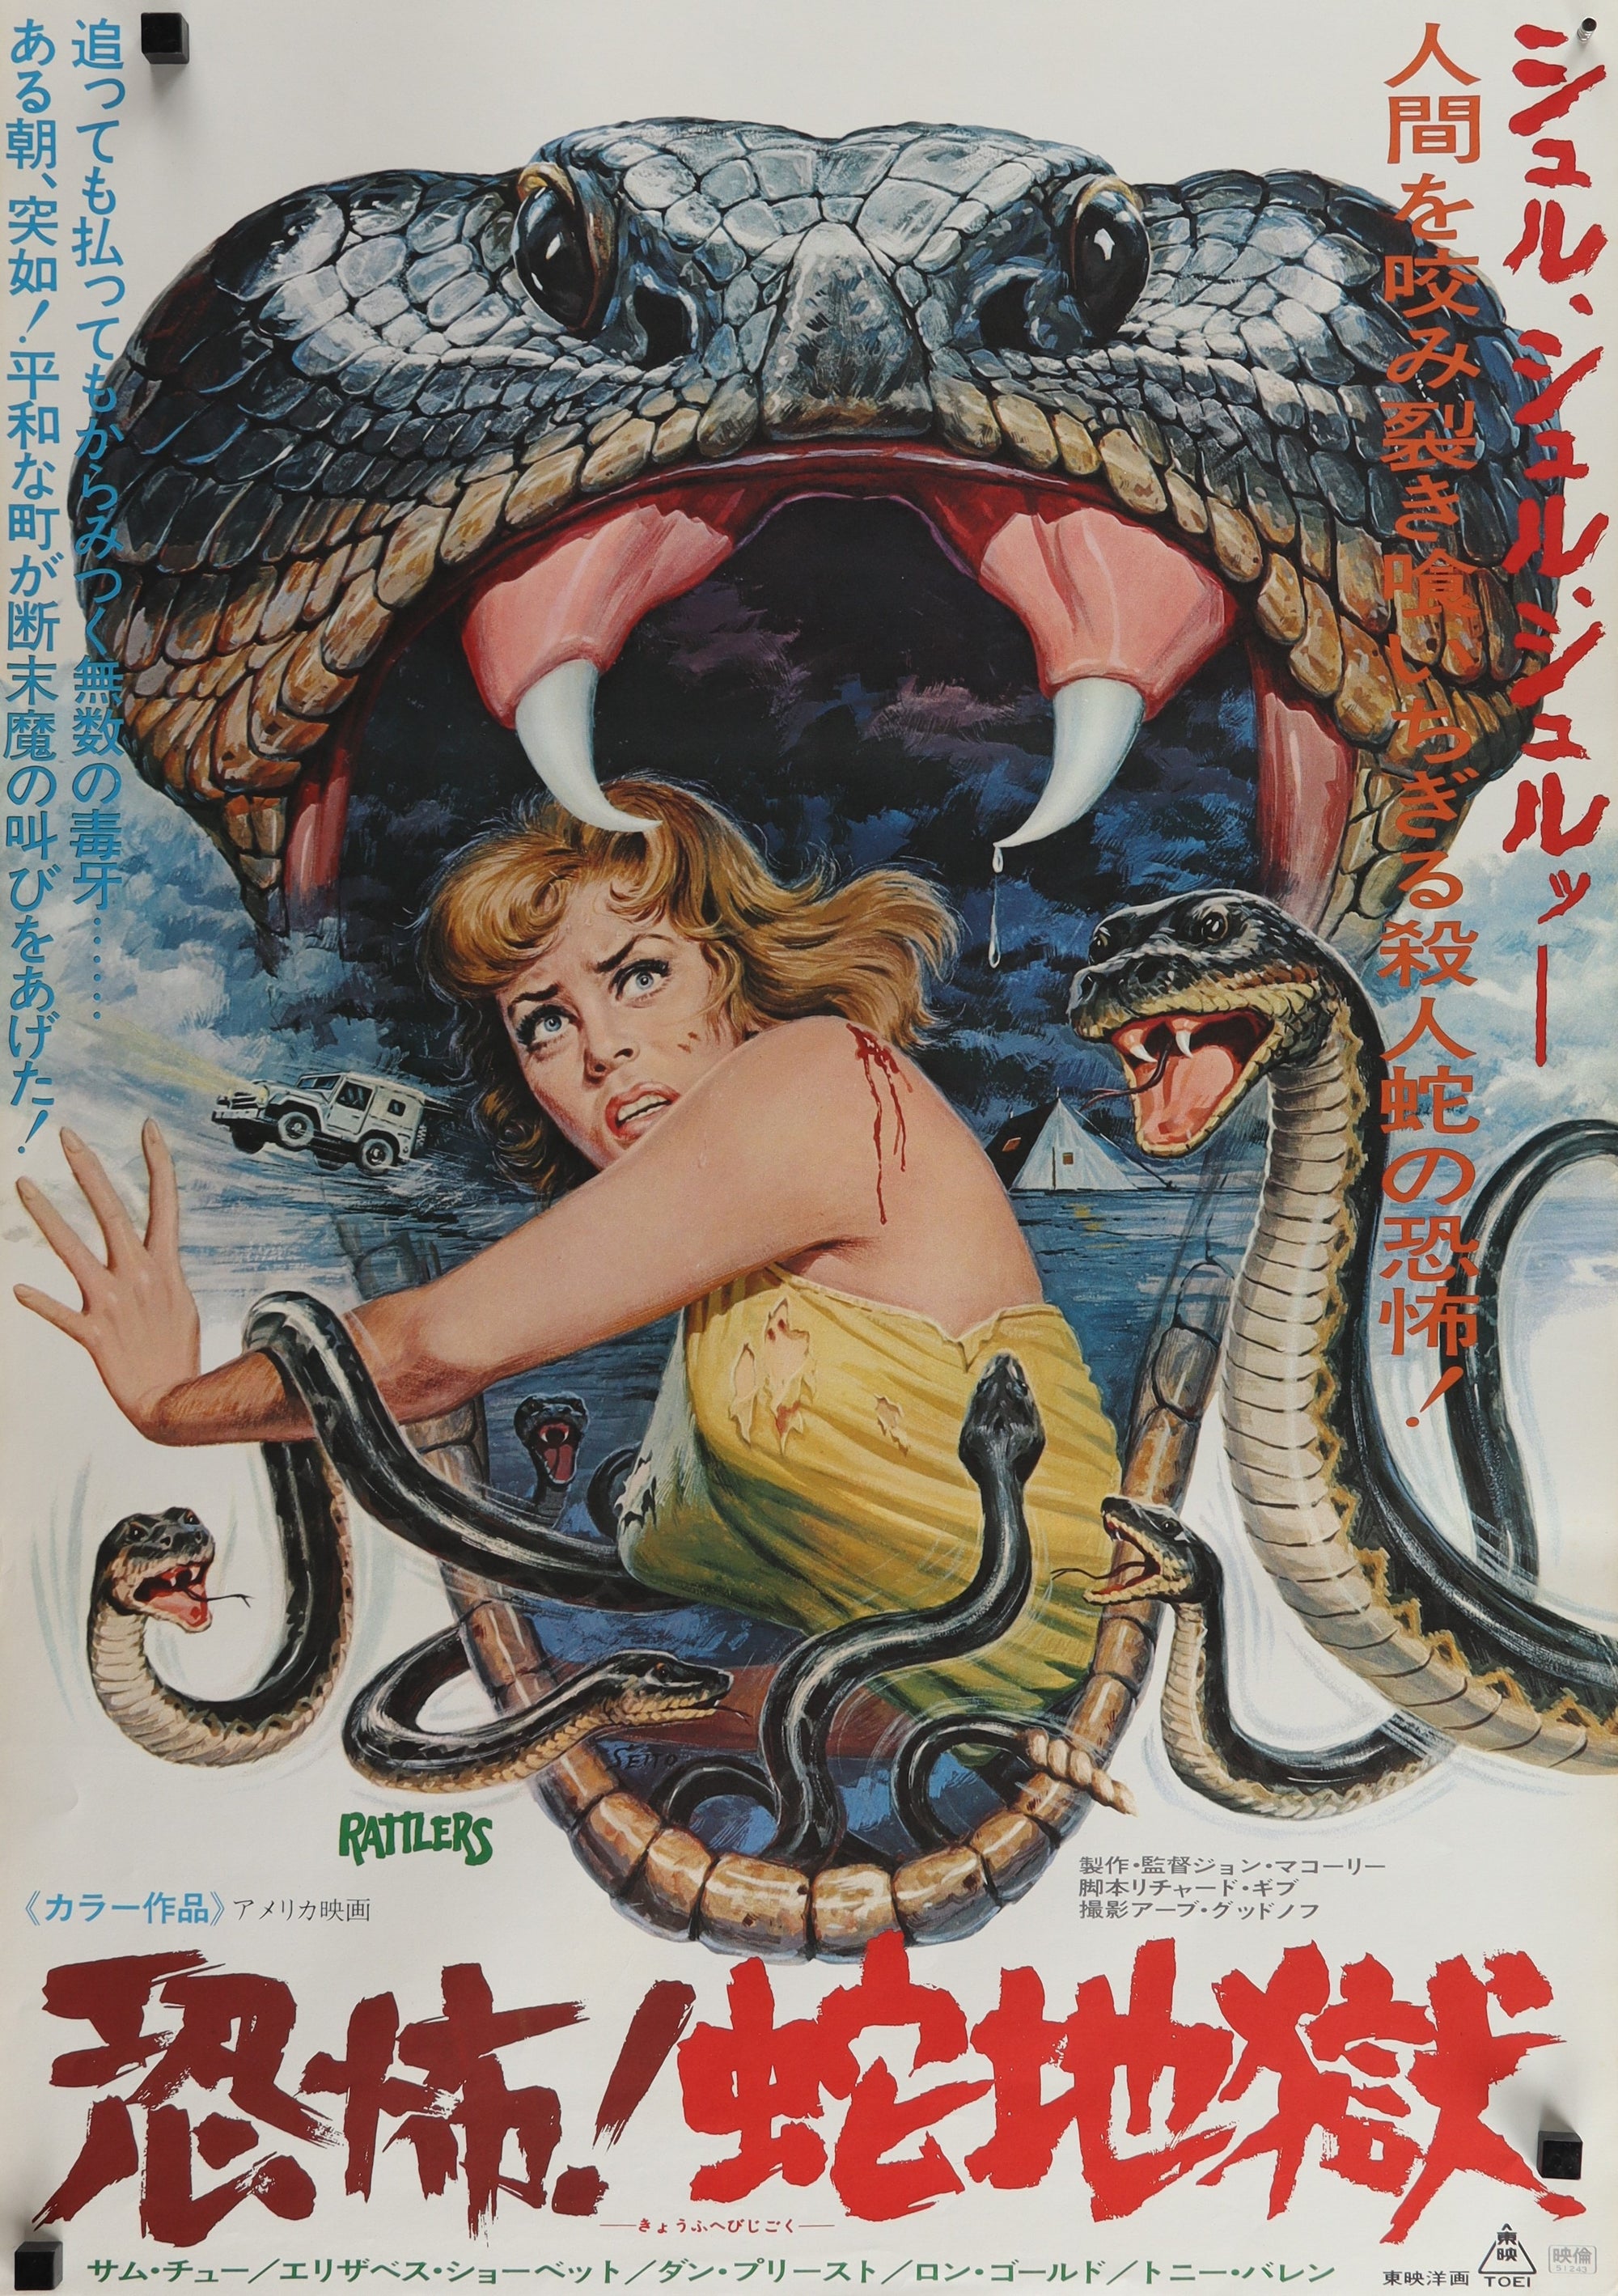 Rattlers- Japanese Release - Authentic Vintage Poster